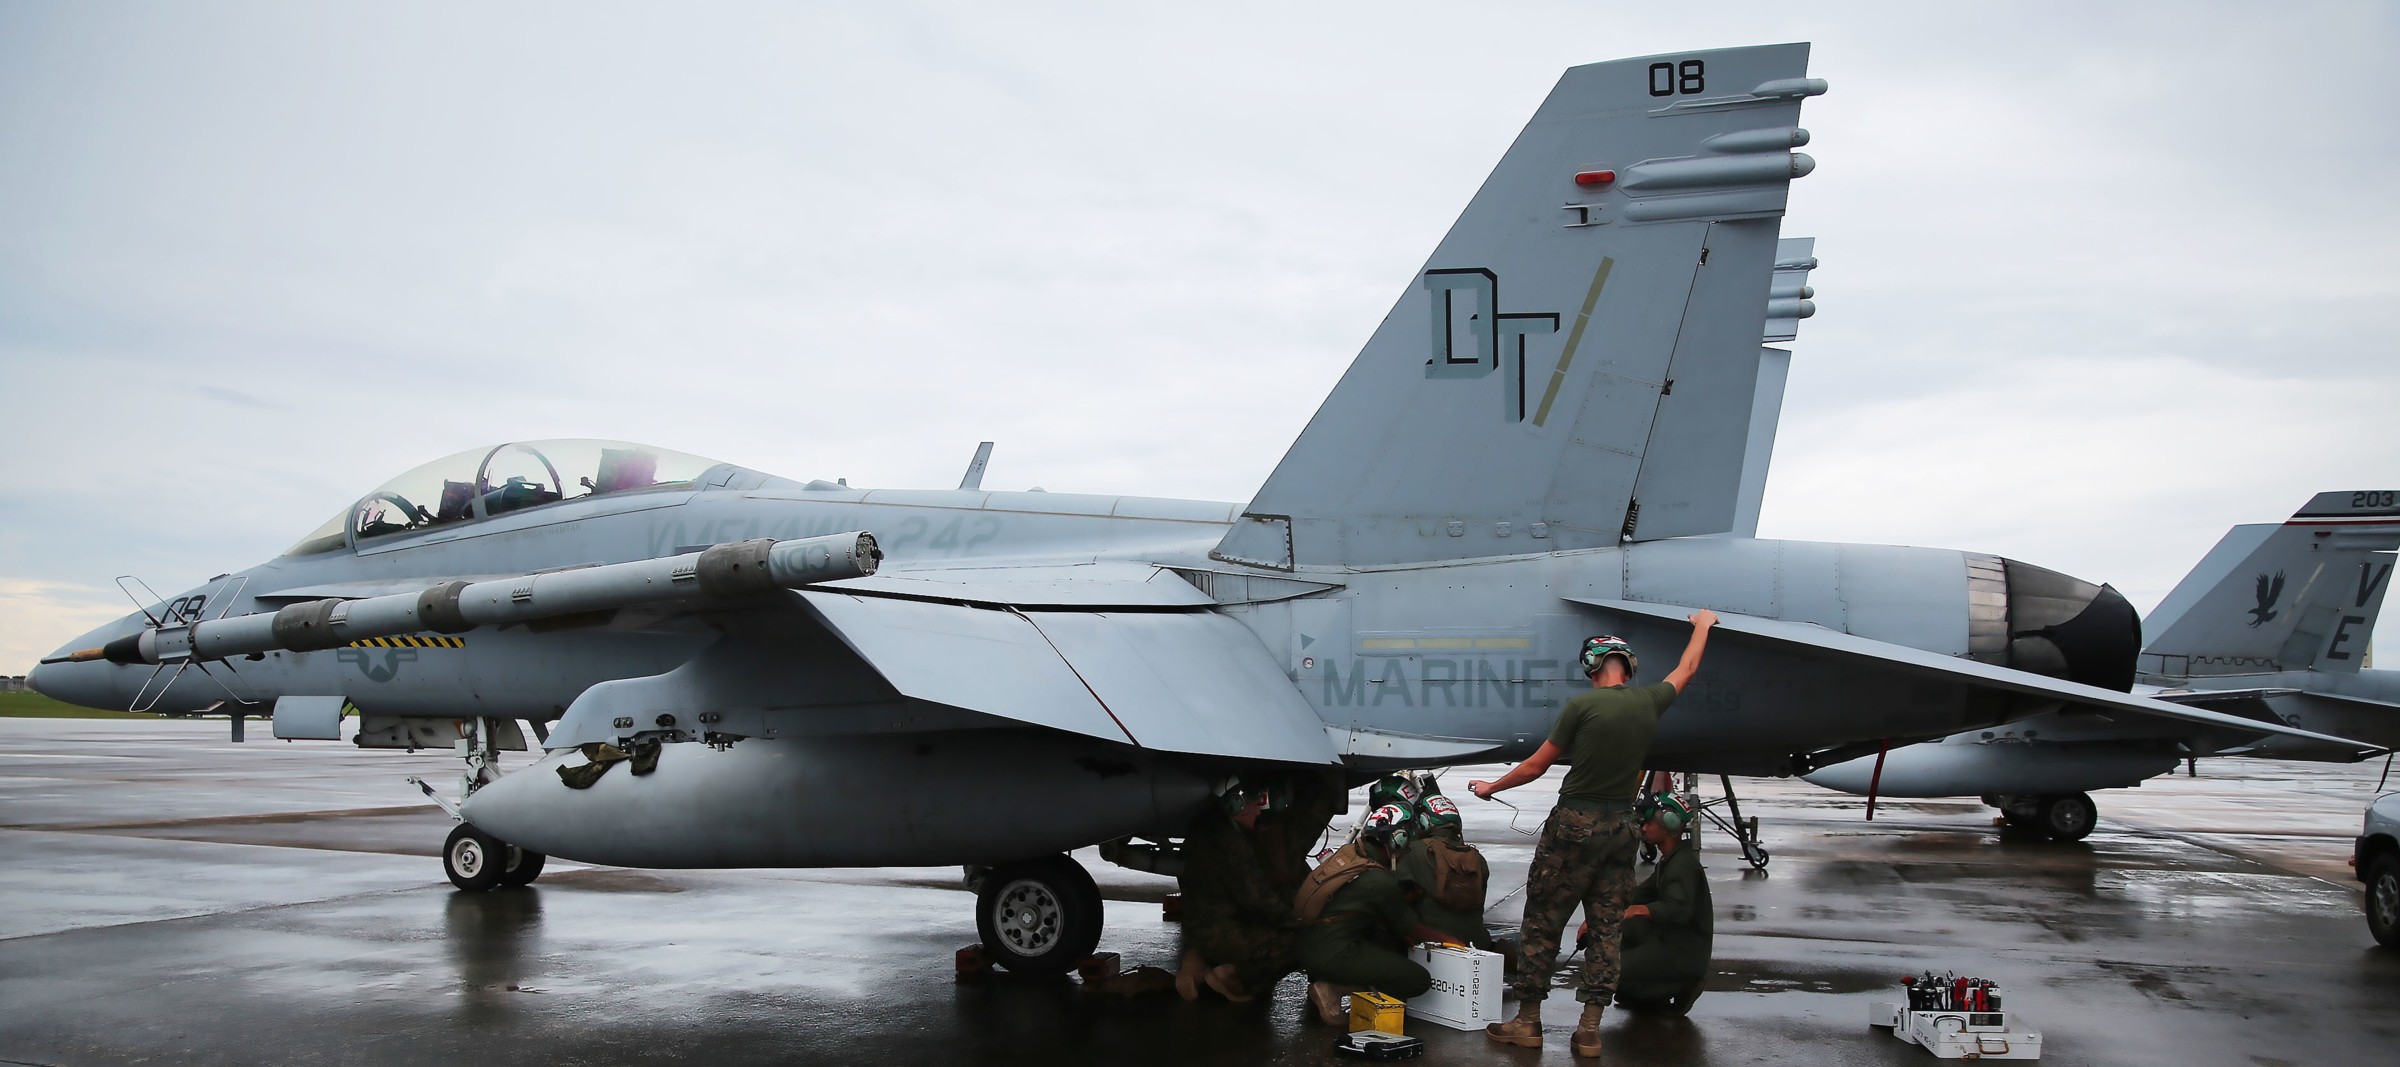 vmfa(aw)-242 bats marine all-weather fighter attack squadron usmc f/a-18d hornet 69